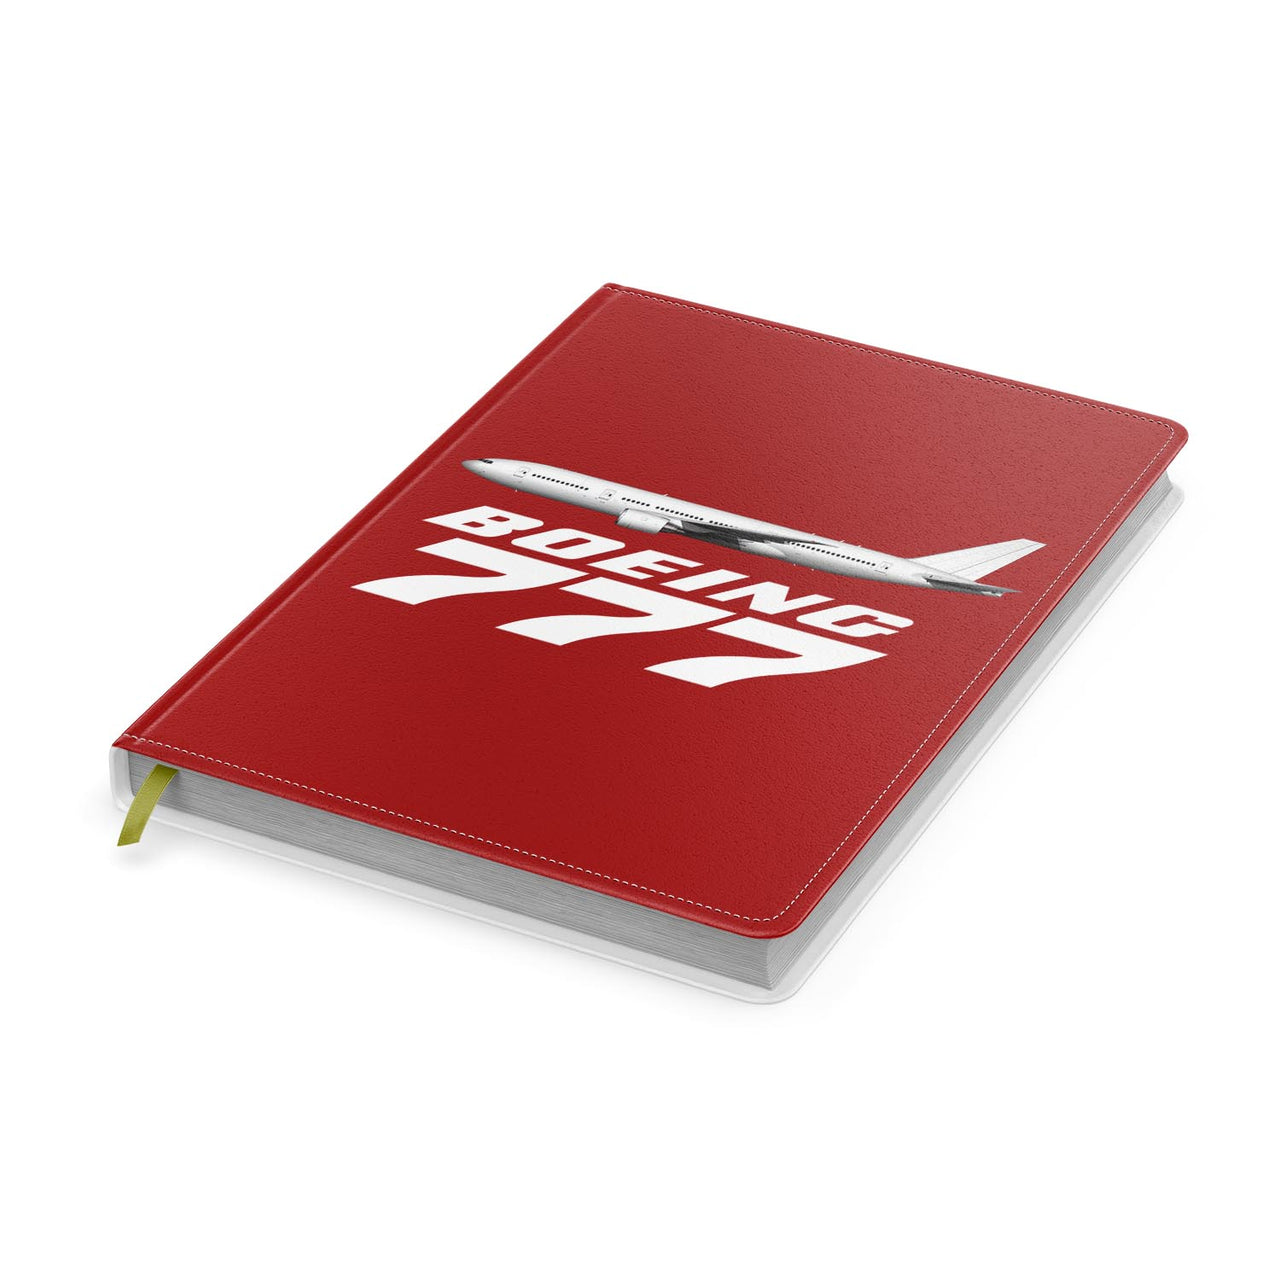 The Boeing 777 Designed Notebooks